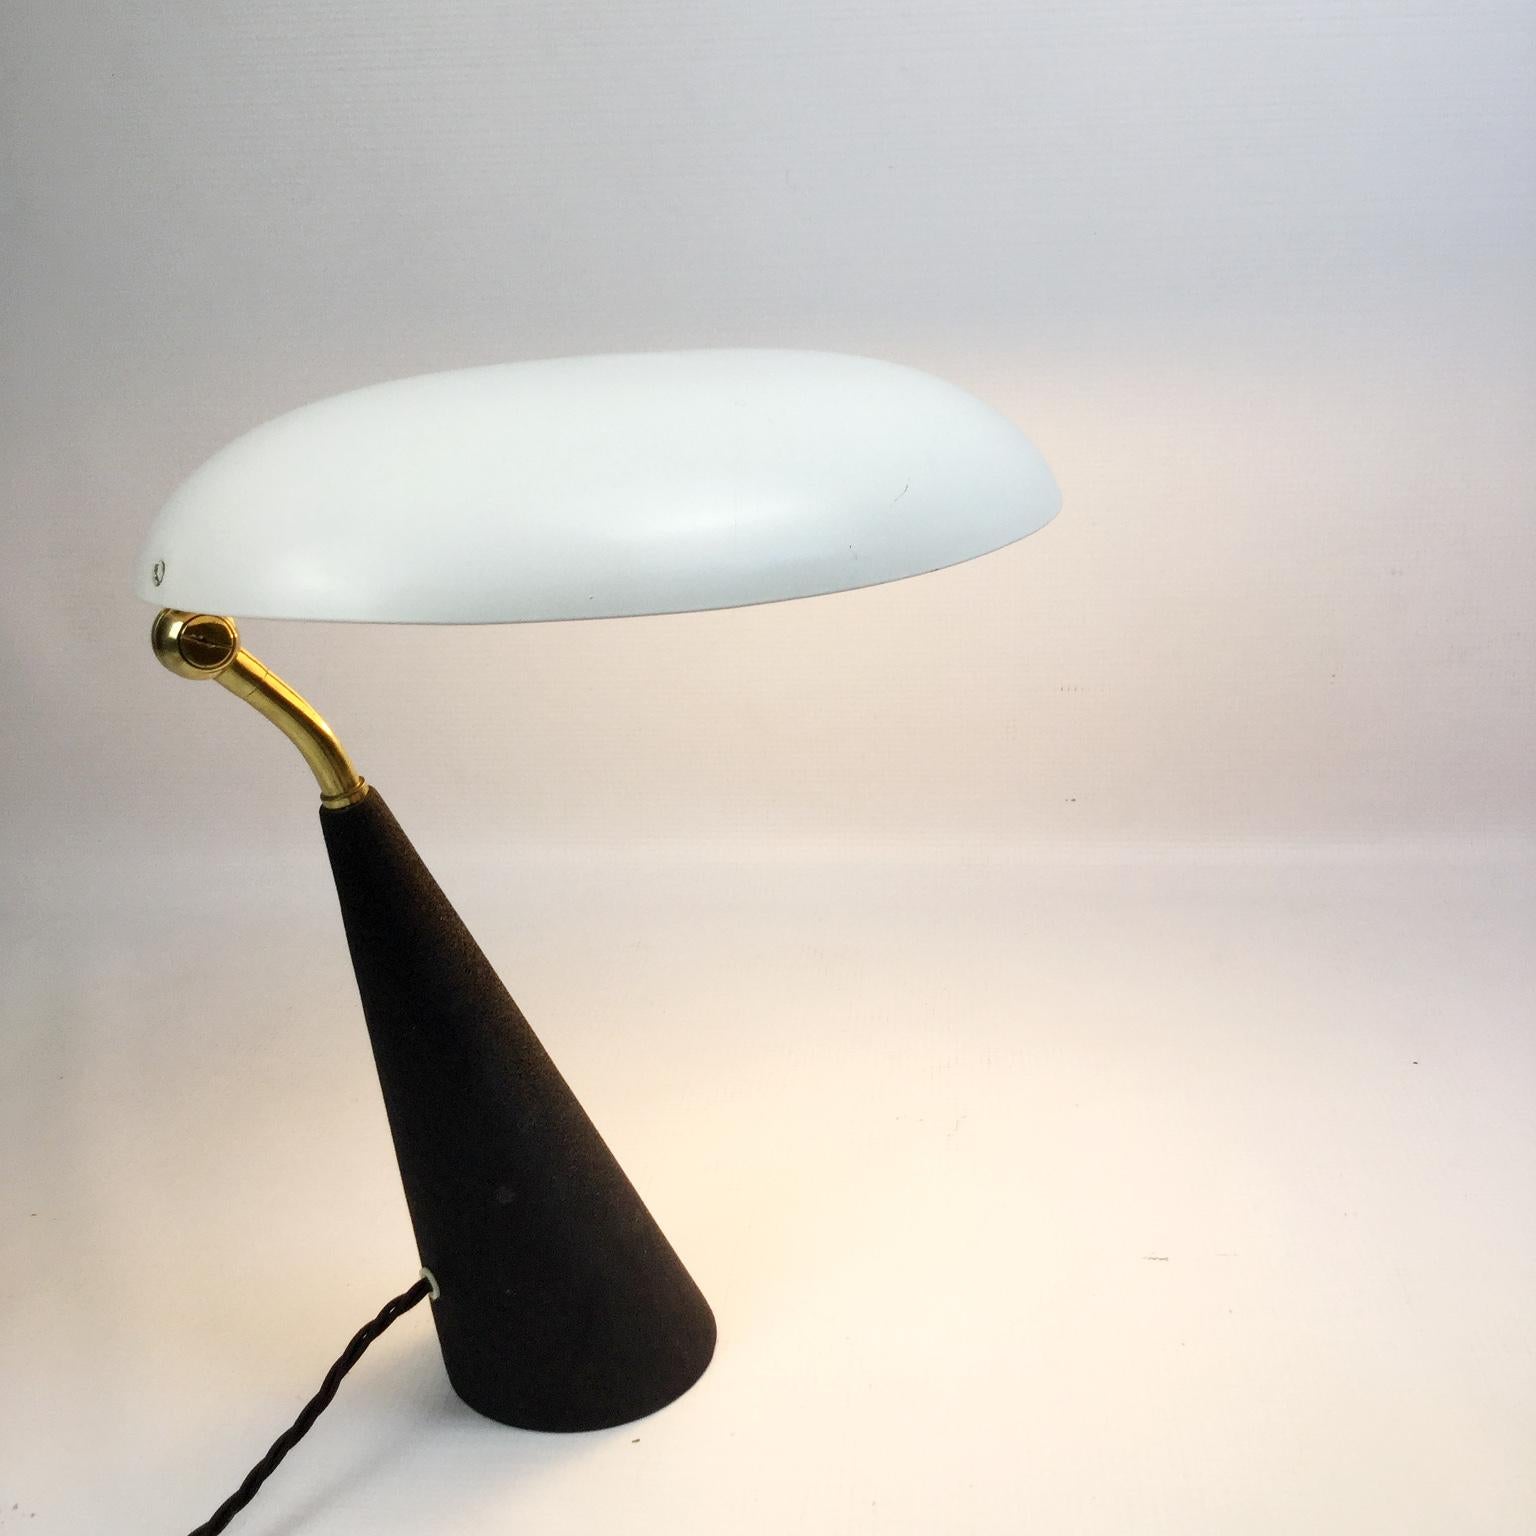 1950s Italian table lamp with adjustable shade 
Rewired with black cotton-insulated cable
Original bakelite socket including on and off switch.